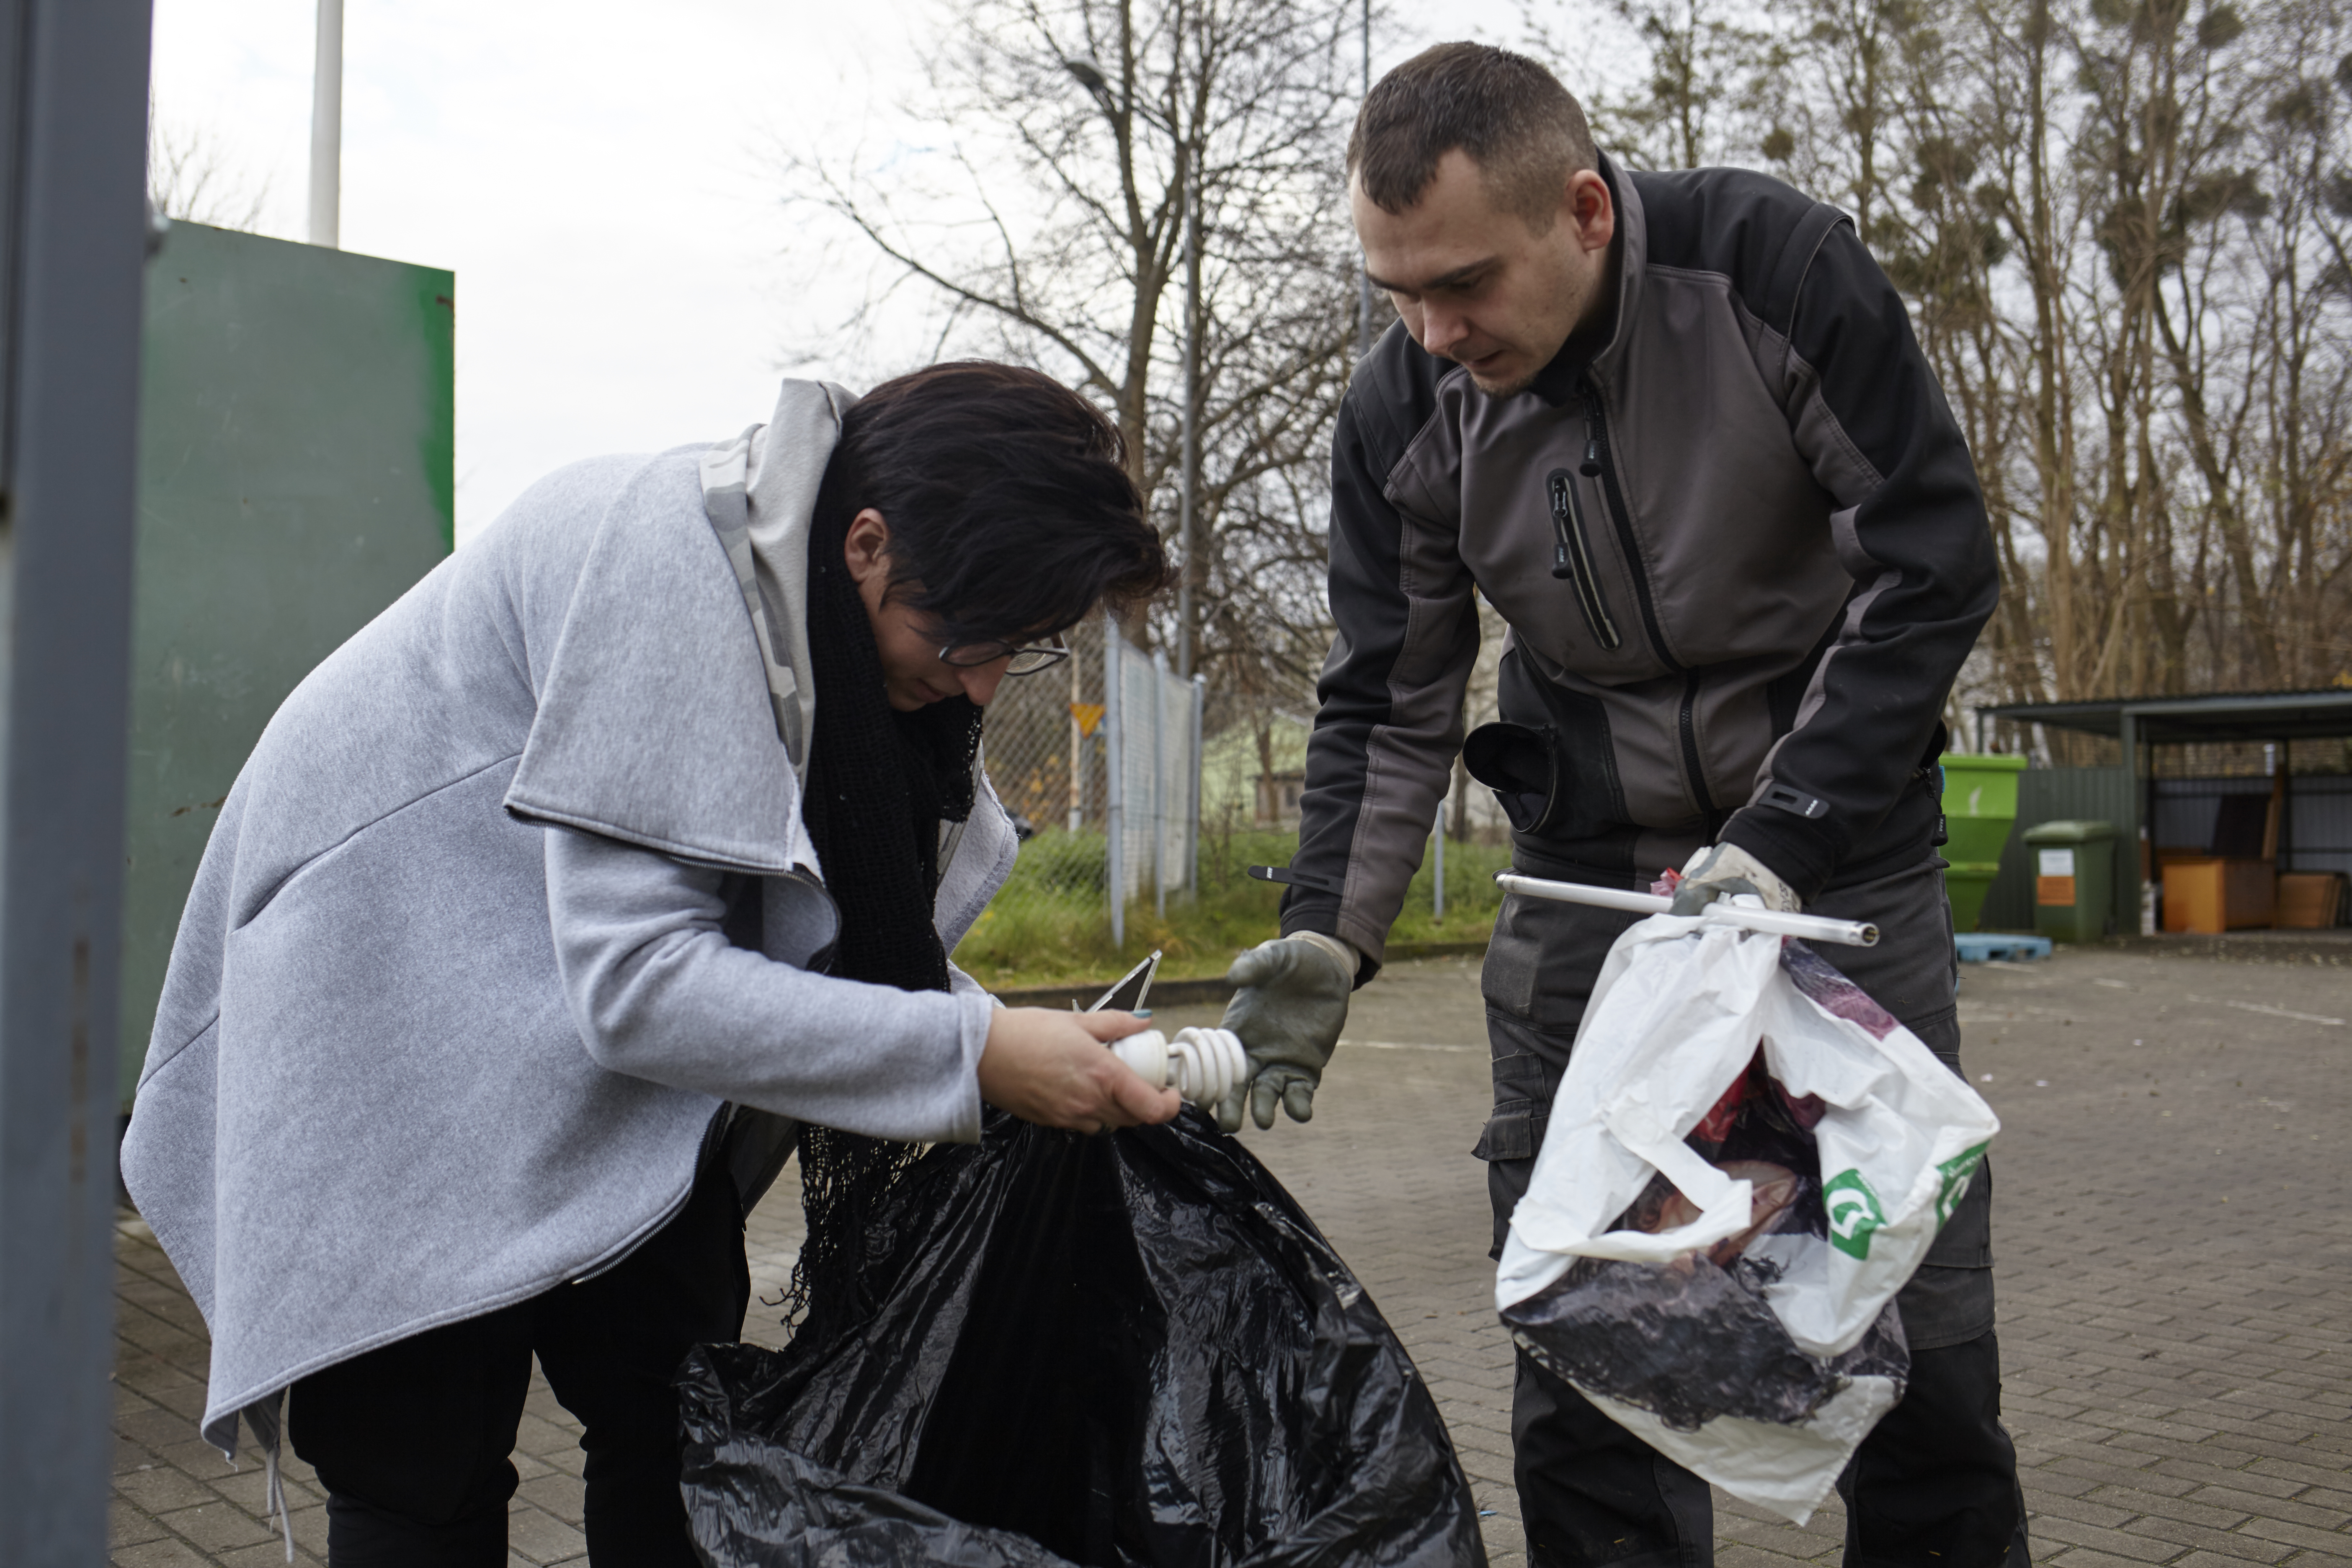 The picture presents the municipal waste collection point. Two Szczecin dwellers – a woman and a man – in the foreground. A woman is holding a plastic bag, bringing out a light bulb and giving it to a man.